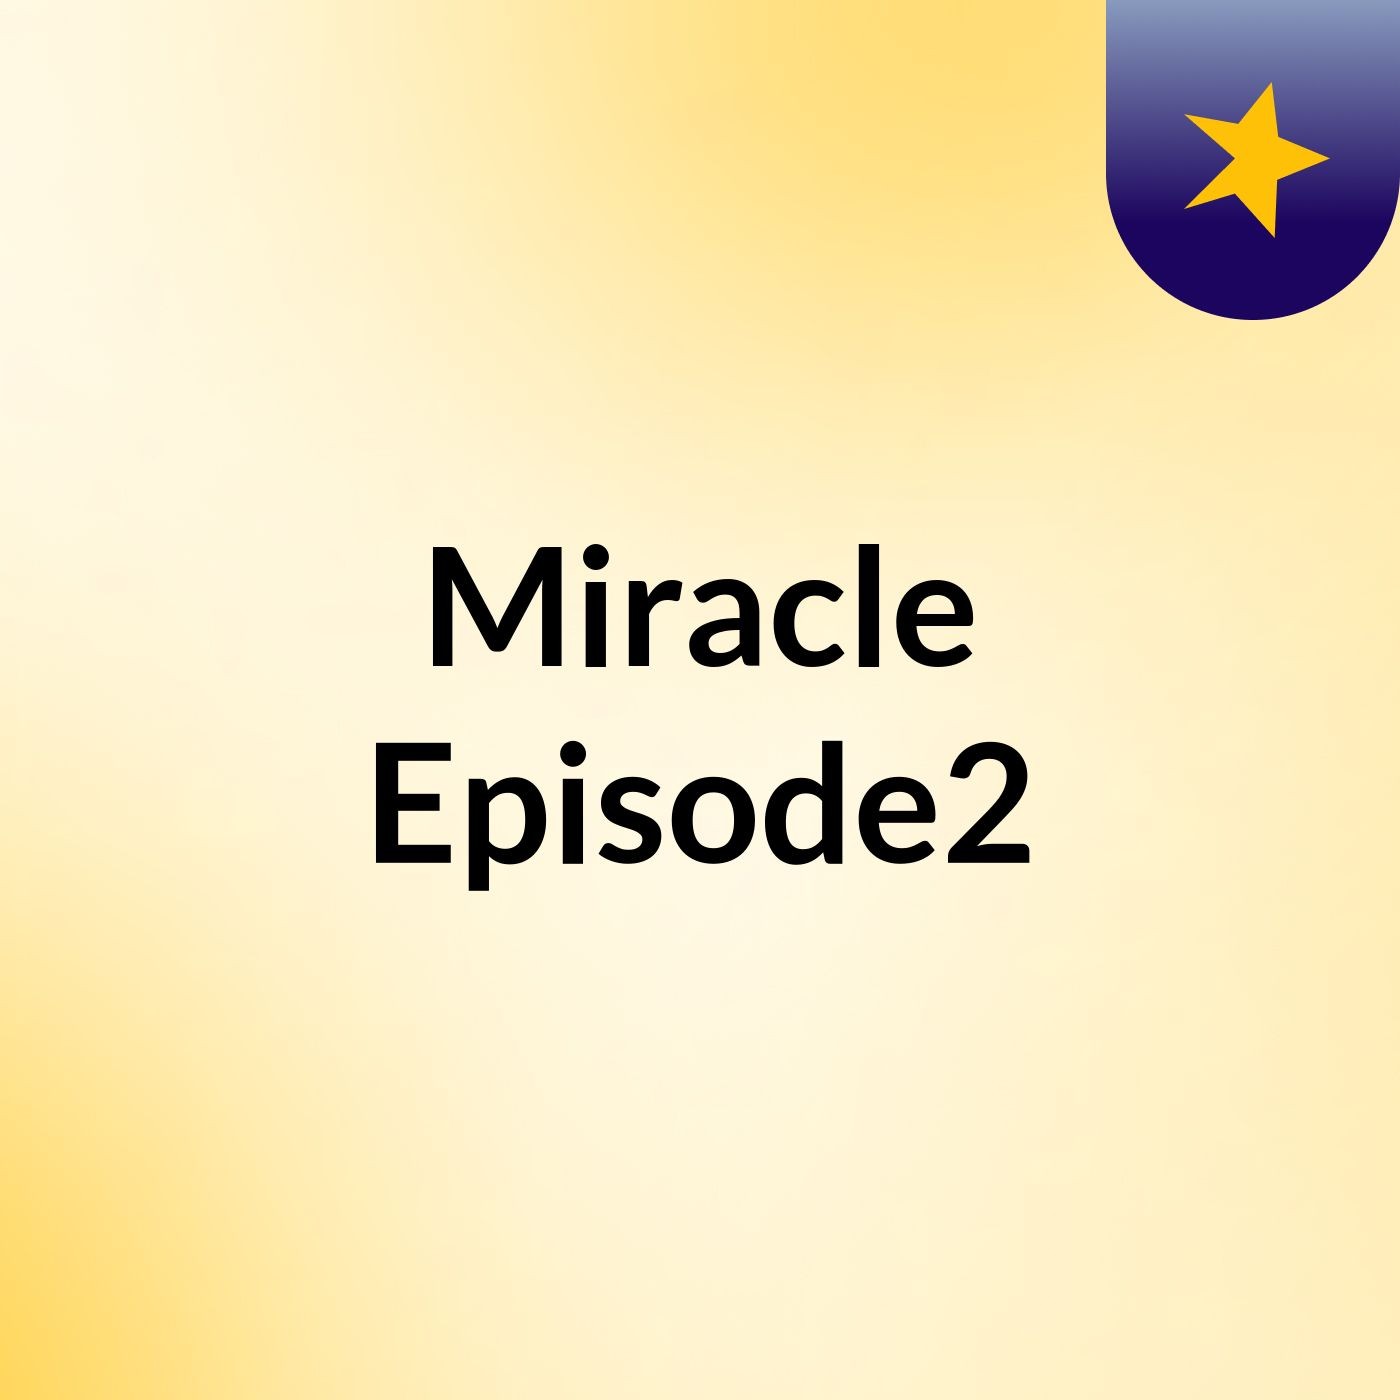 Episode 3 - Miracle Episode2